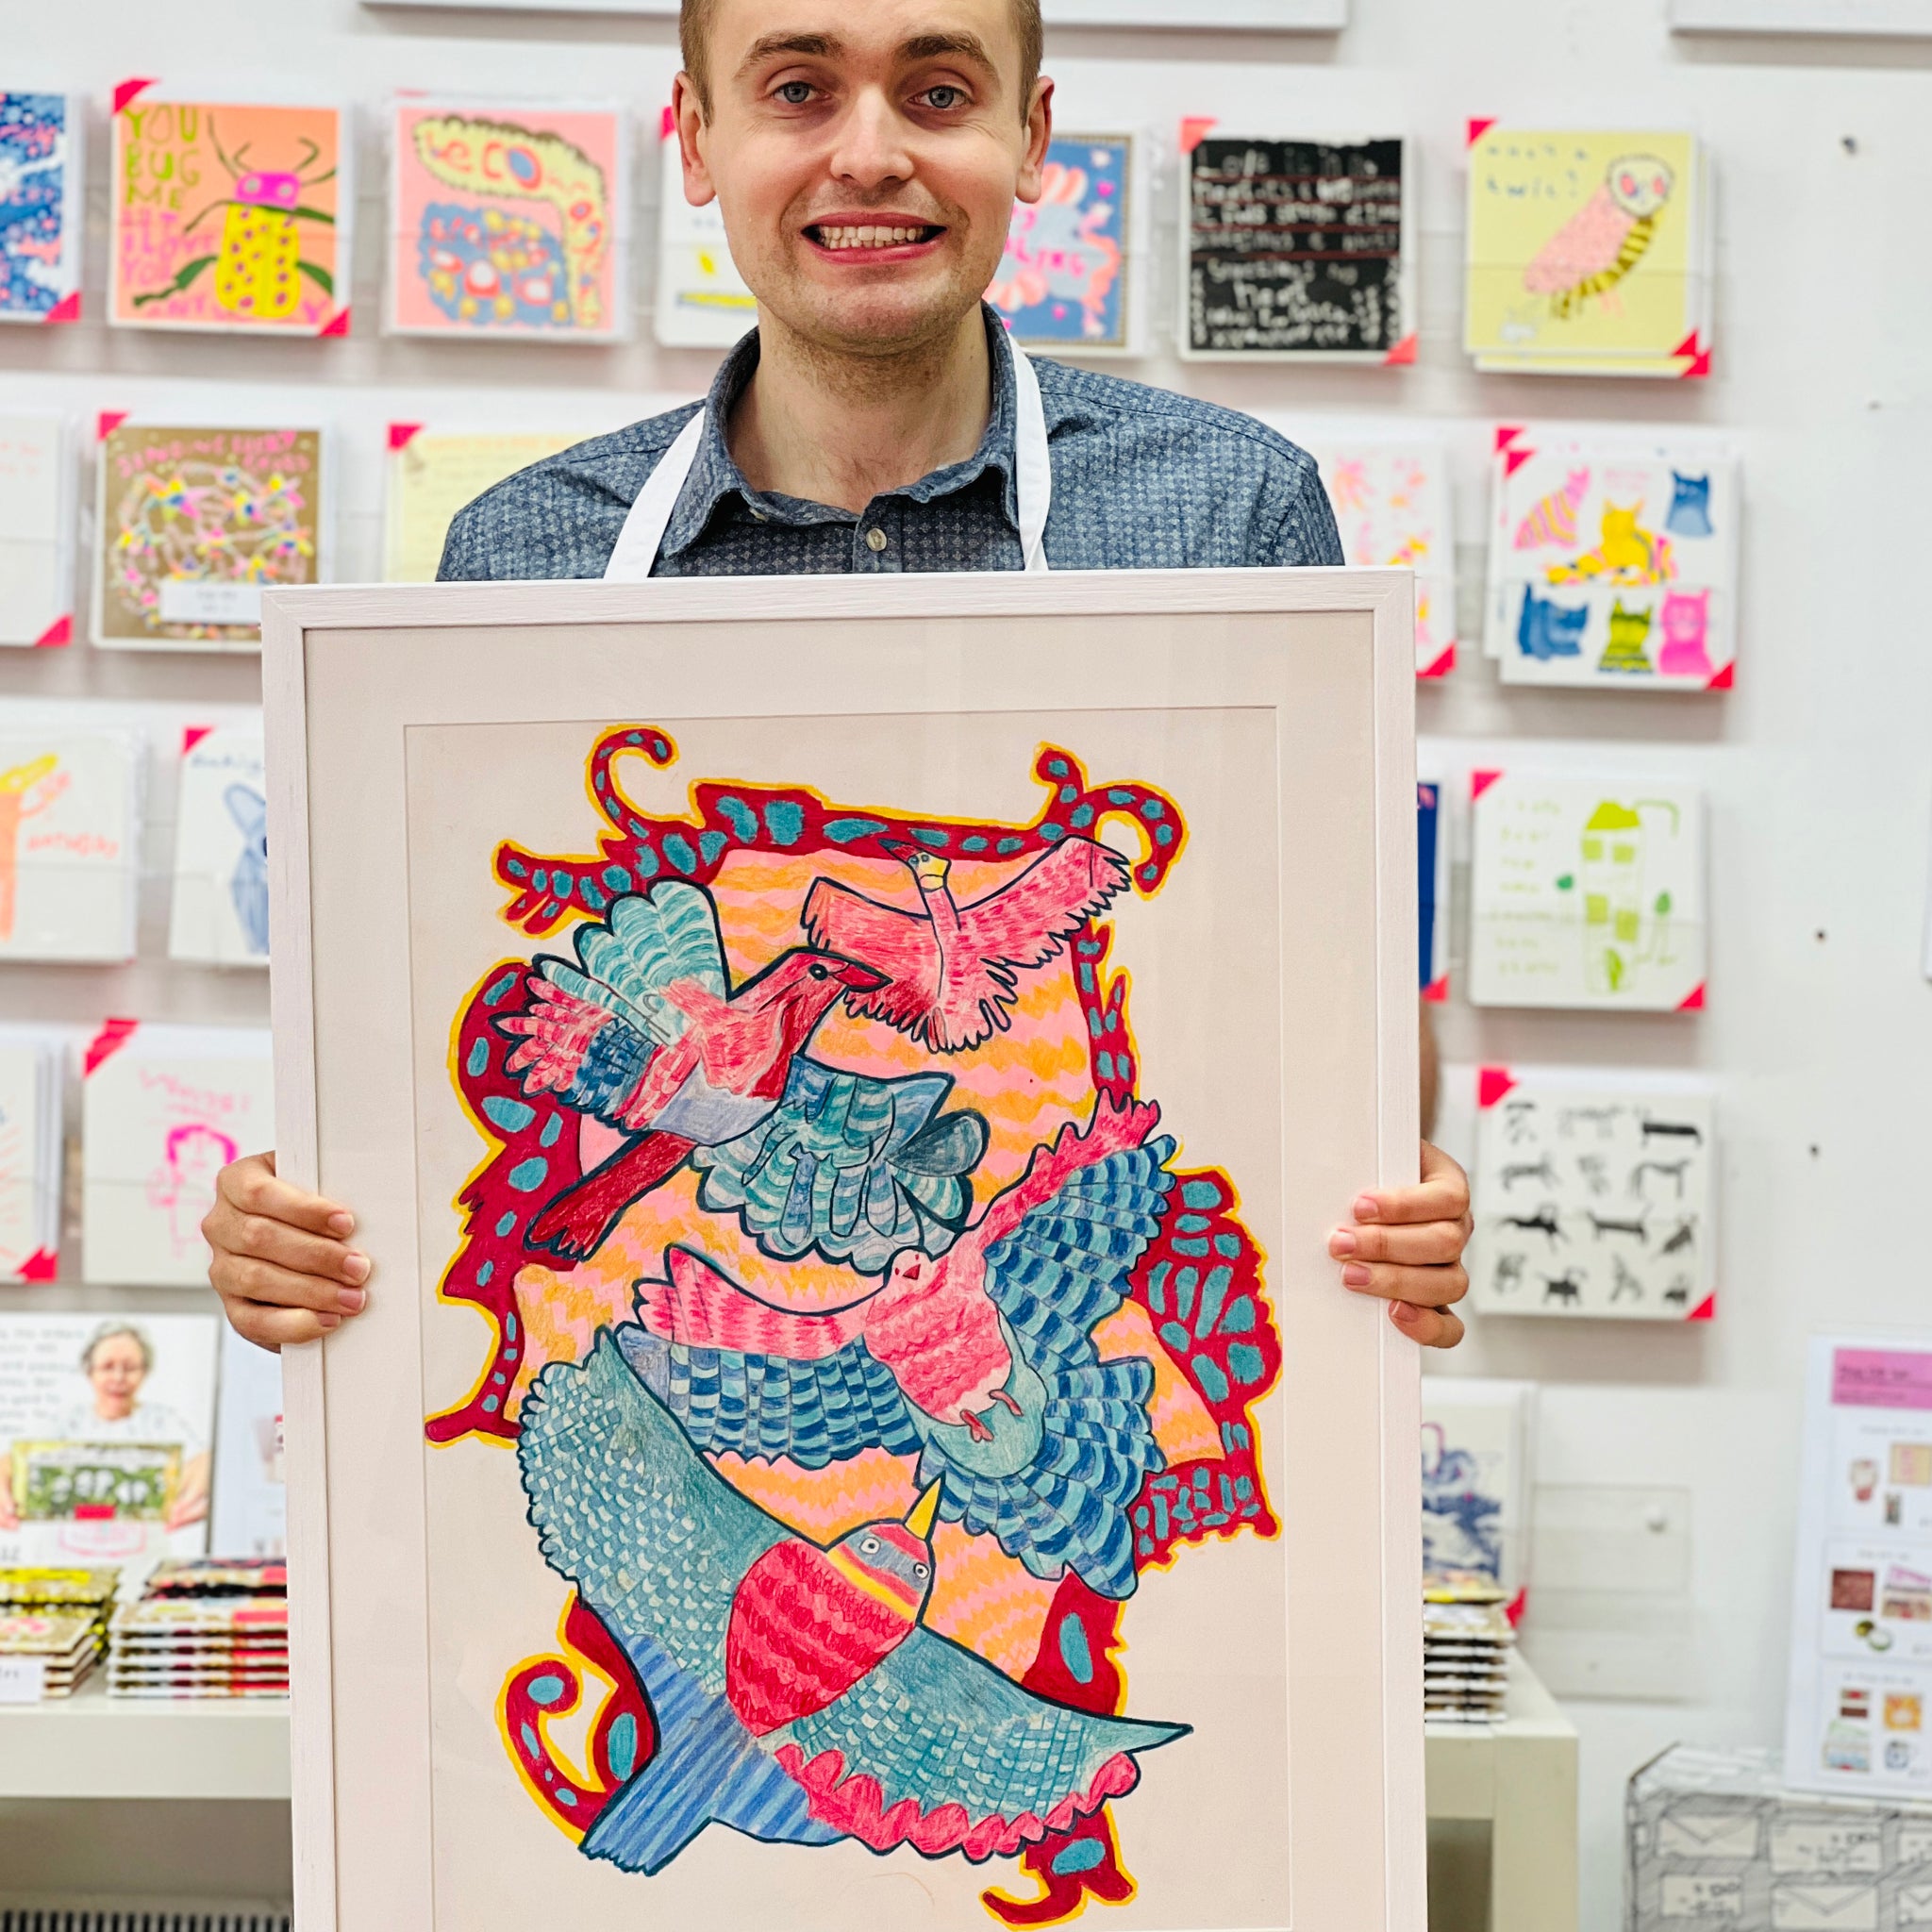 Male artist holding Framed drawing of four blue, pink and yellow birds 